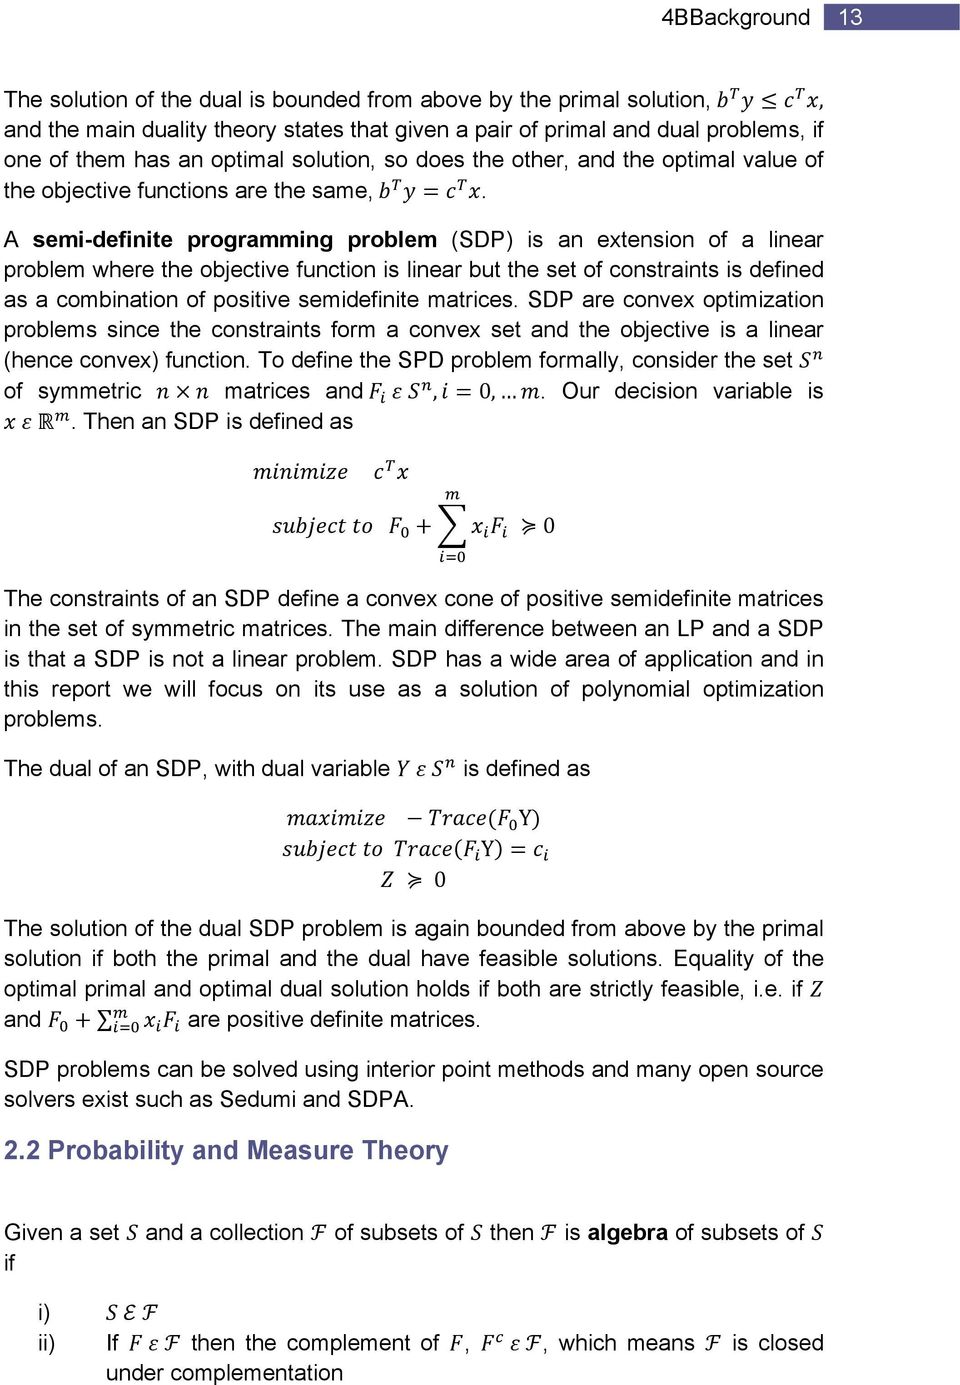 A semi-definite programming problem (SDP) is an extension of a linear problem where the objective function is linear but the set of constraints is defined as a combination of positive semidefinite